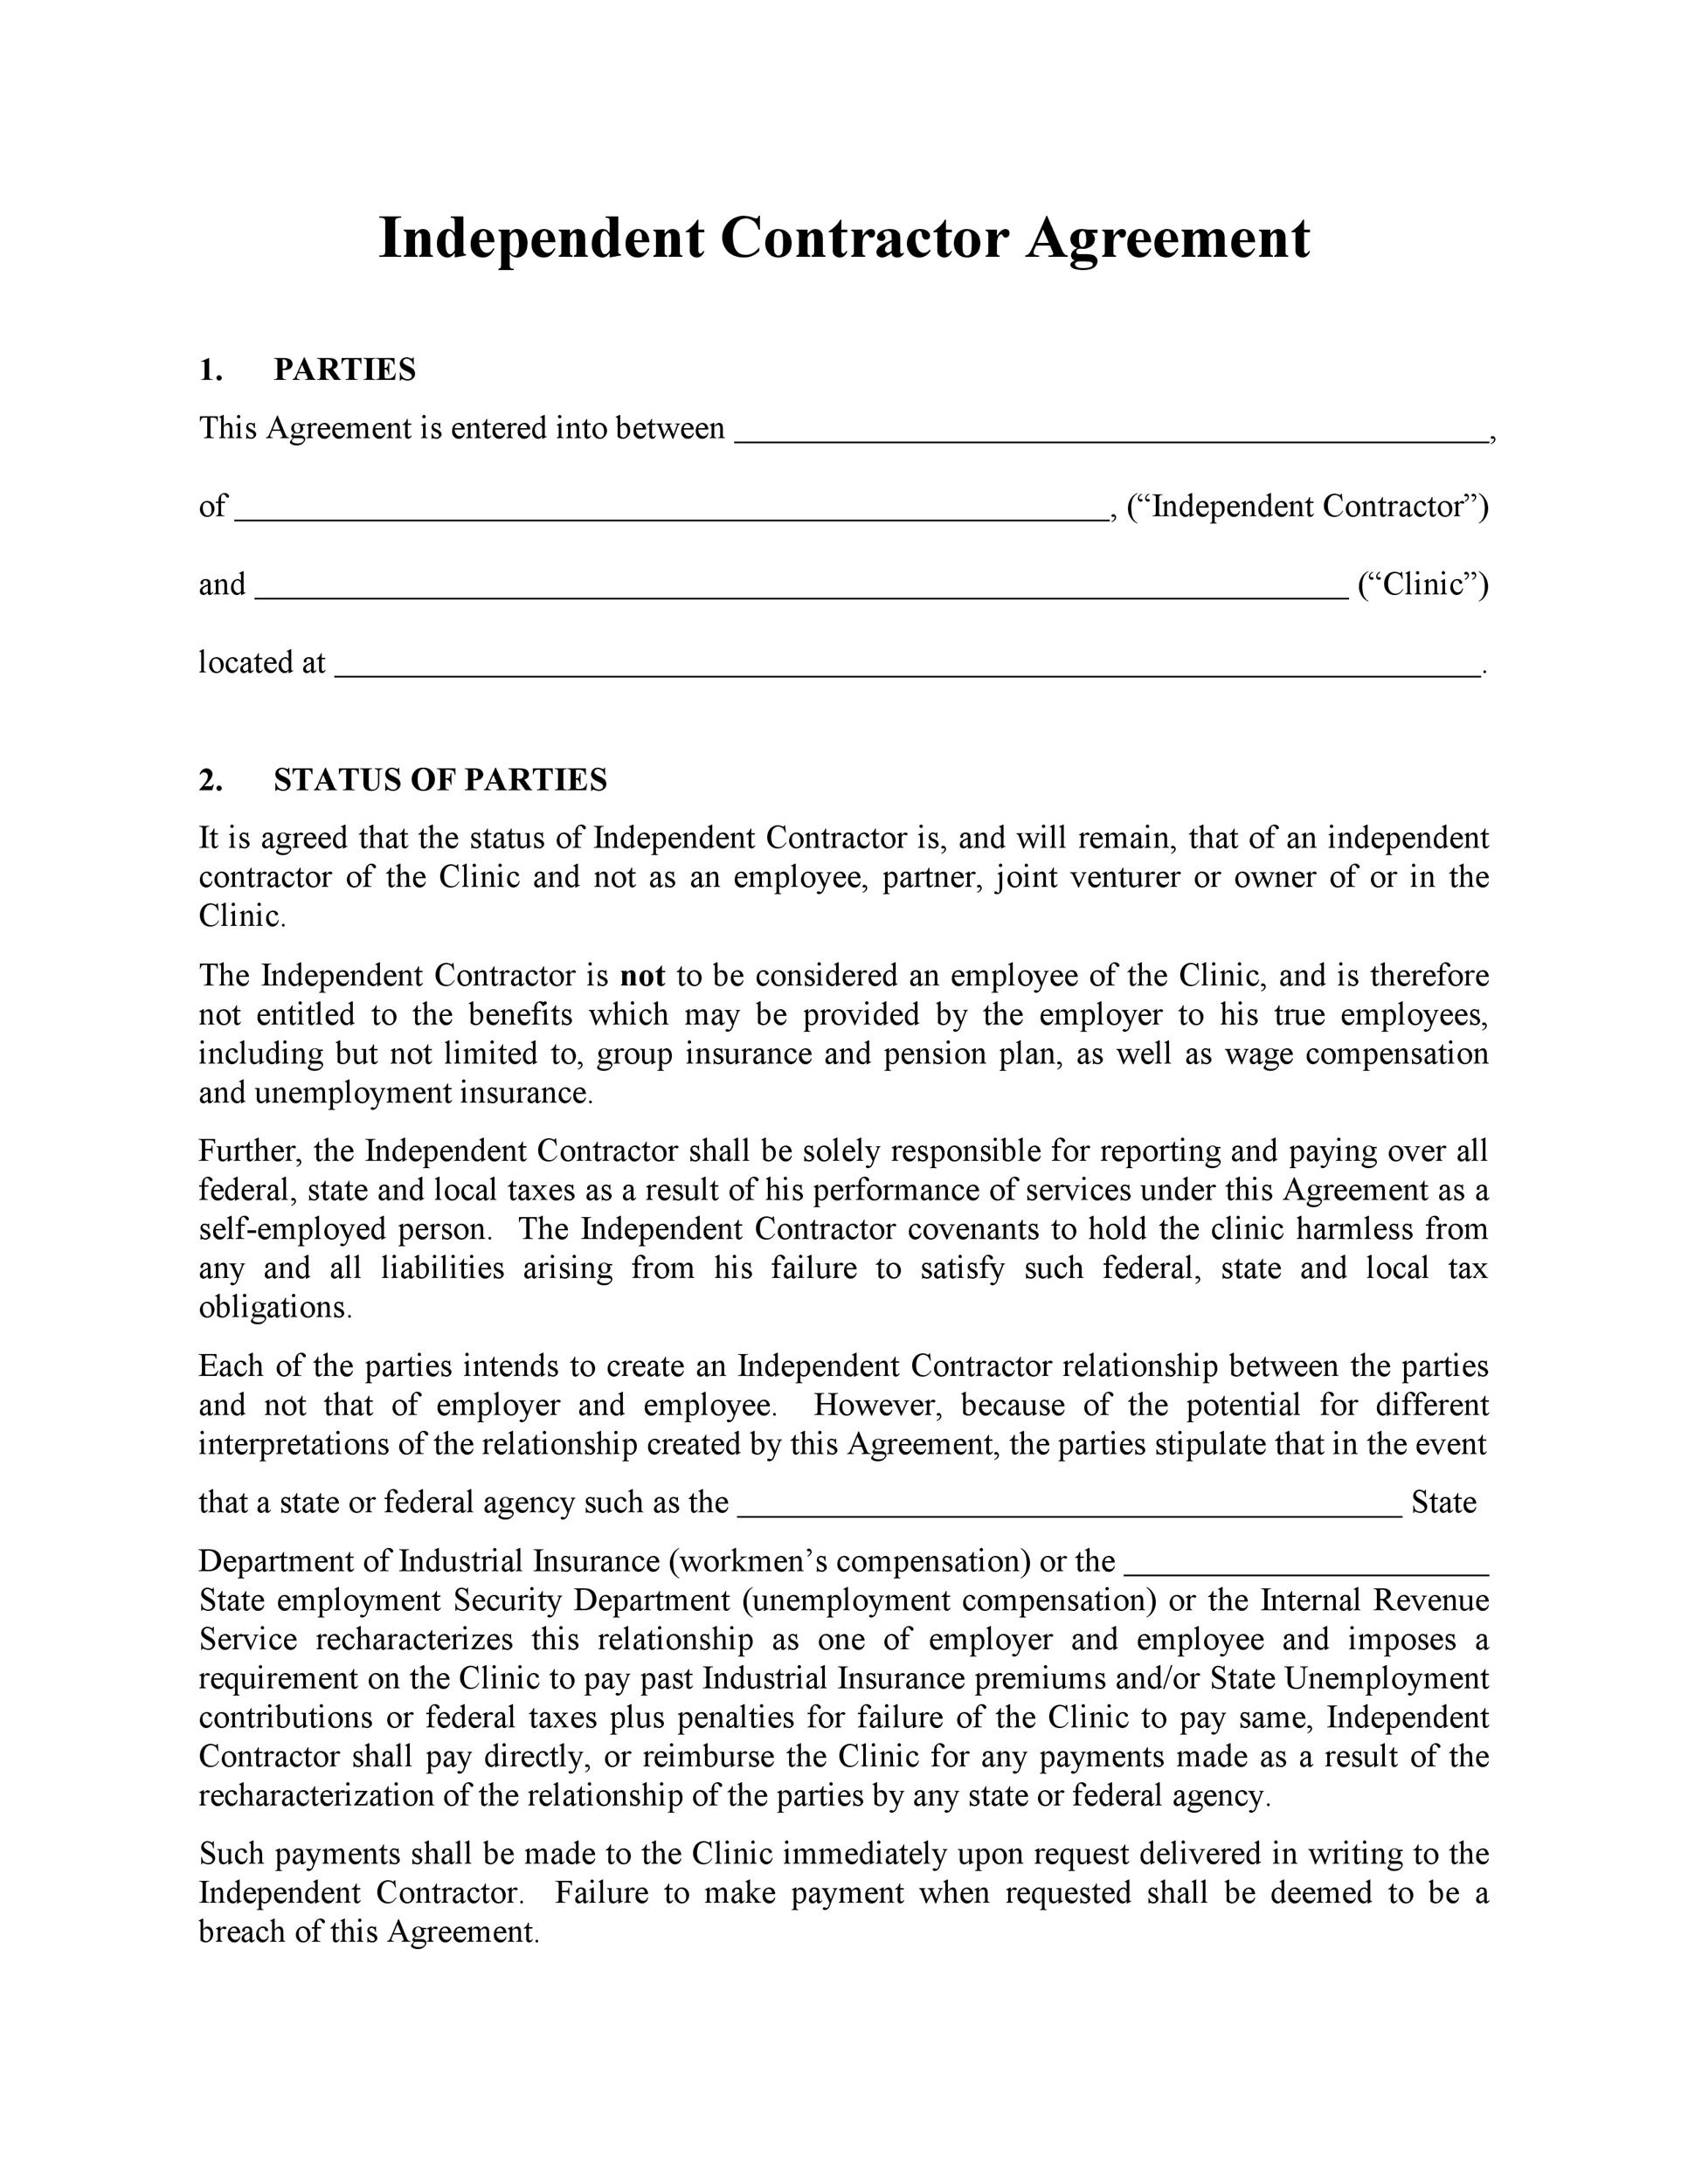 Real Estate Independent Contractor Agreement Template